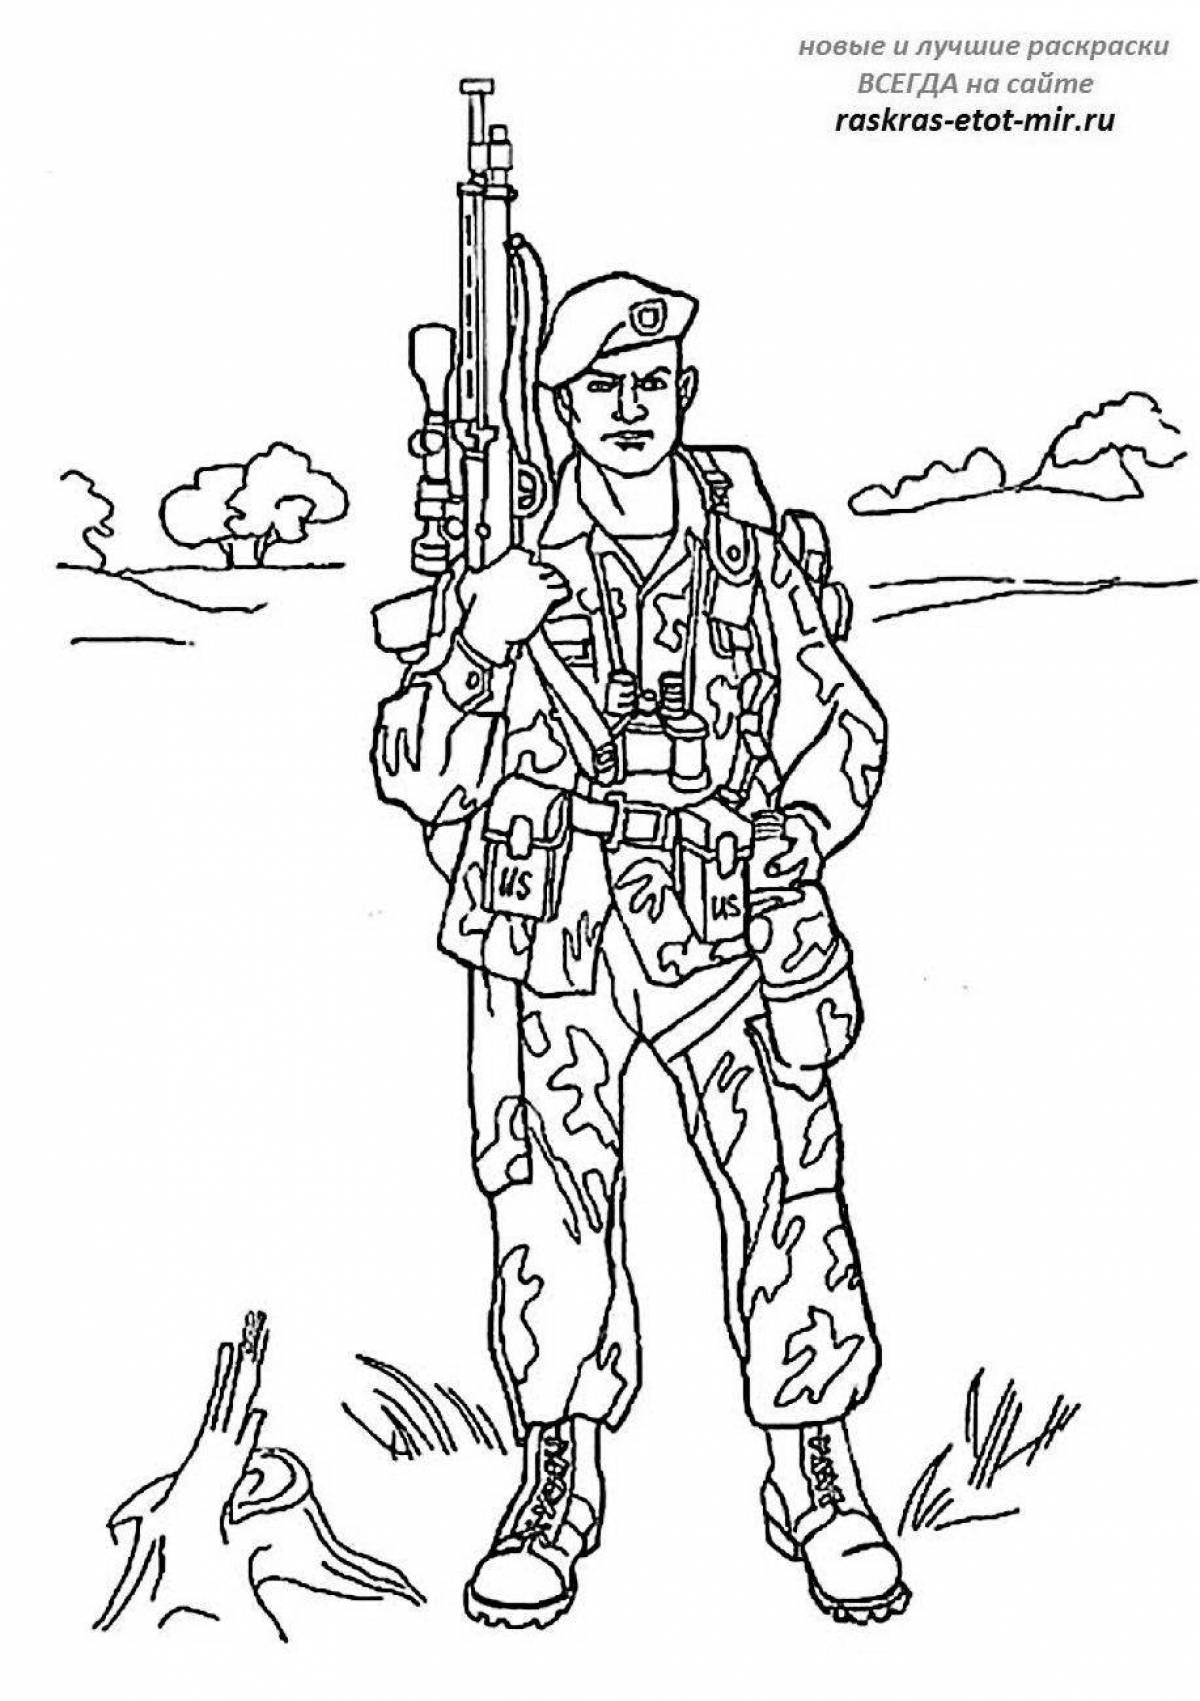 Adorable paratrooper coloring book for kids